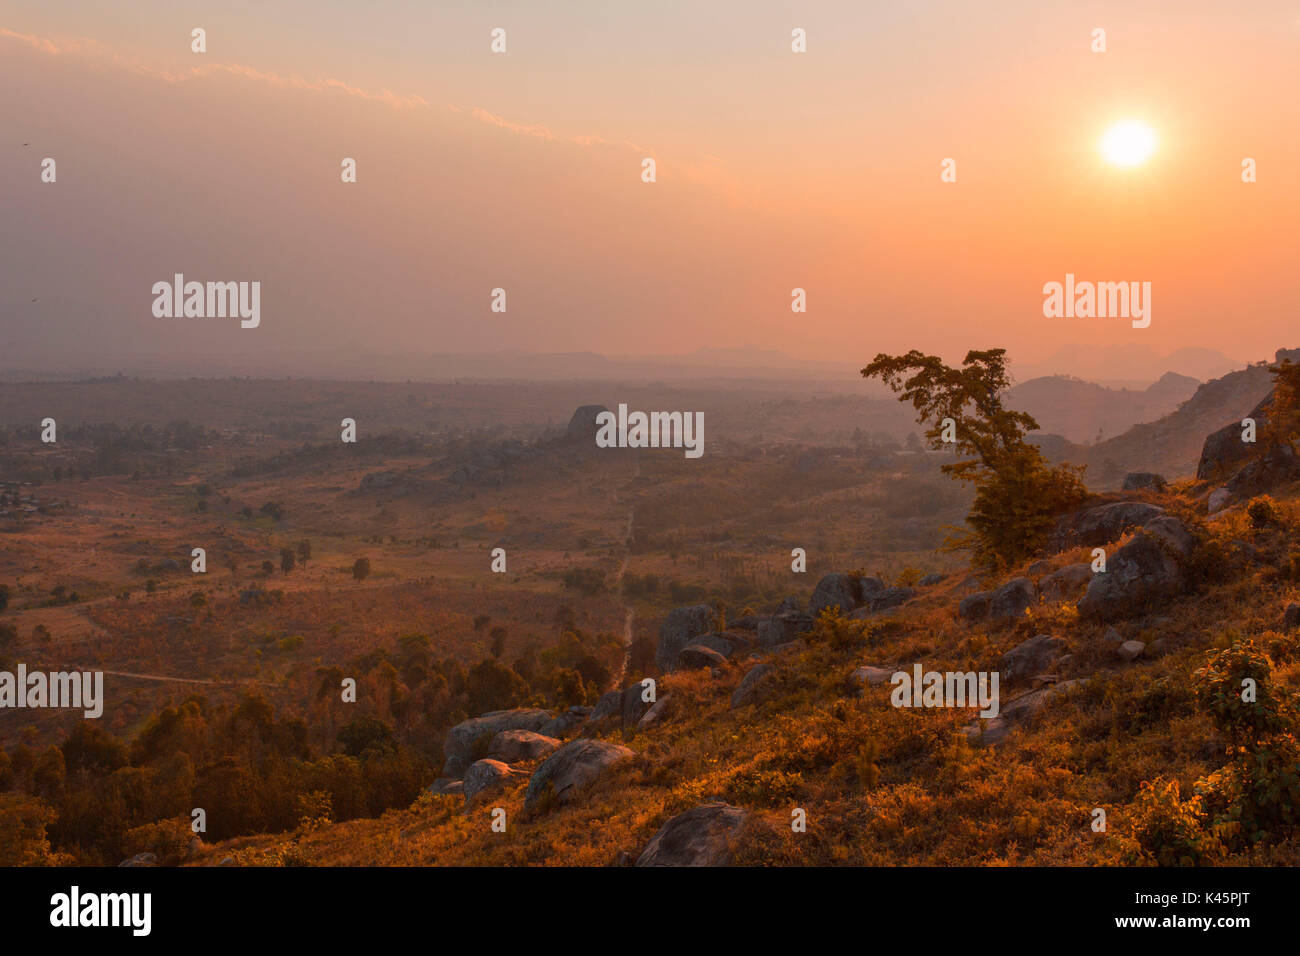 Africa,Malawi,Lilongwe district. African landscape at sunset Stock Photo